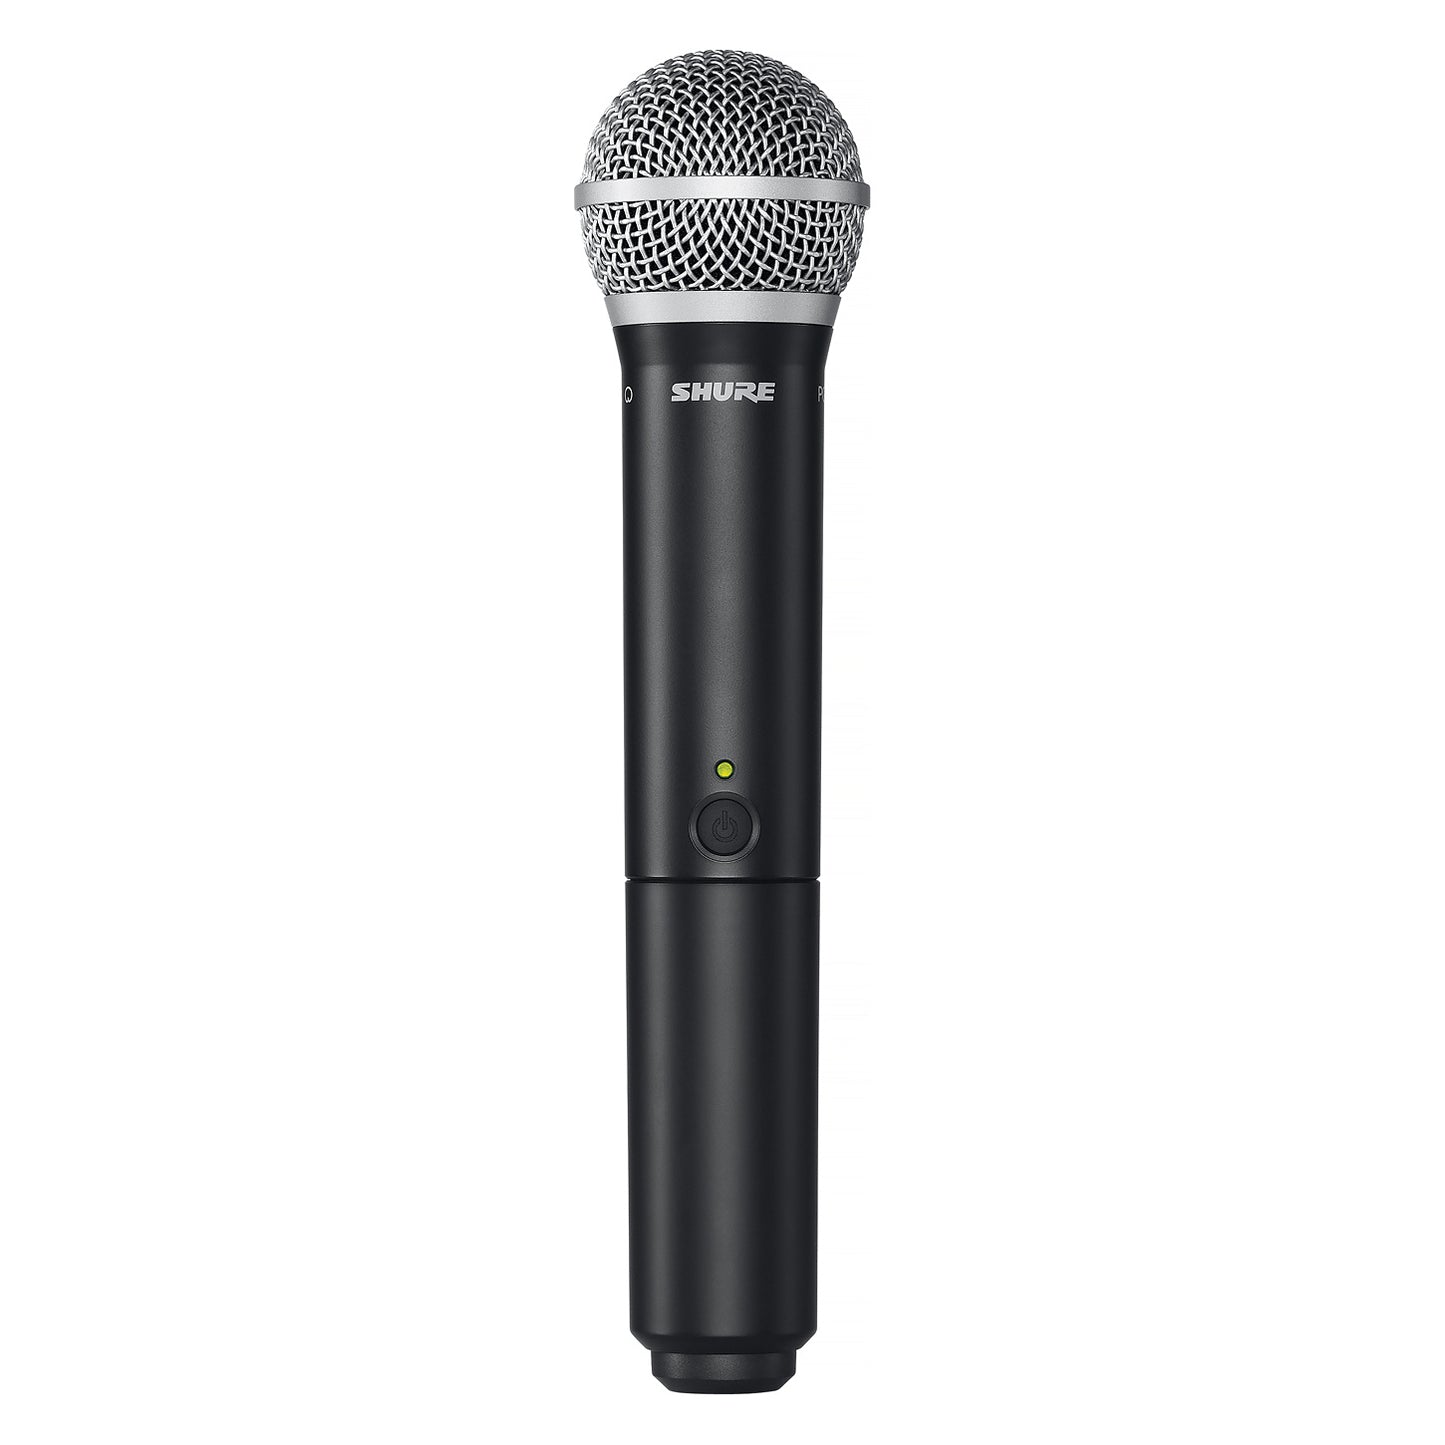 Shure BLX1288/CVL Combination Wireless CVL Lavalier and PG58 Handheld Microphone System, Band H10 (542-572 MHz)